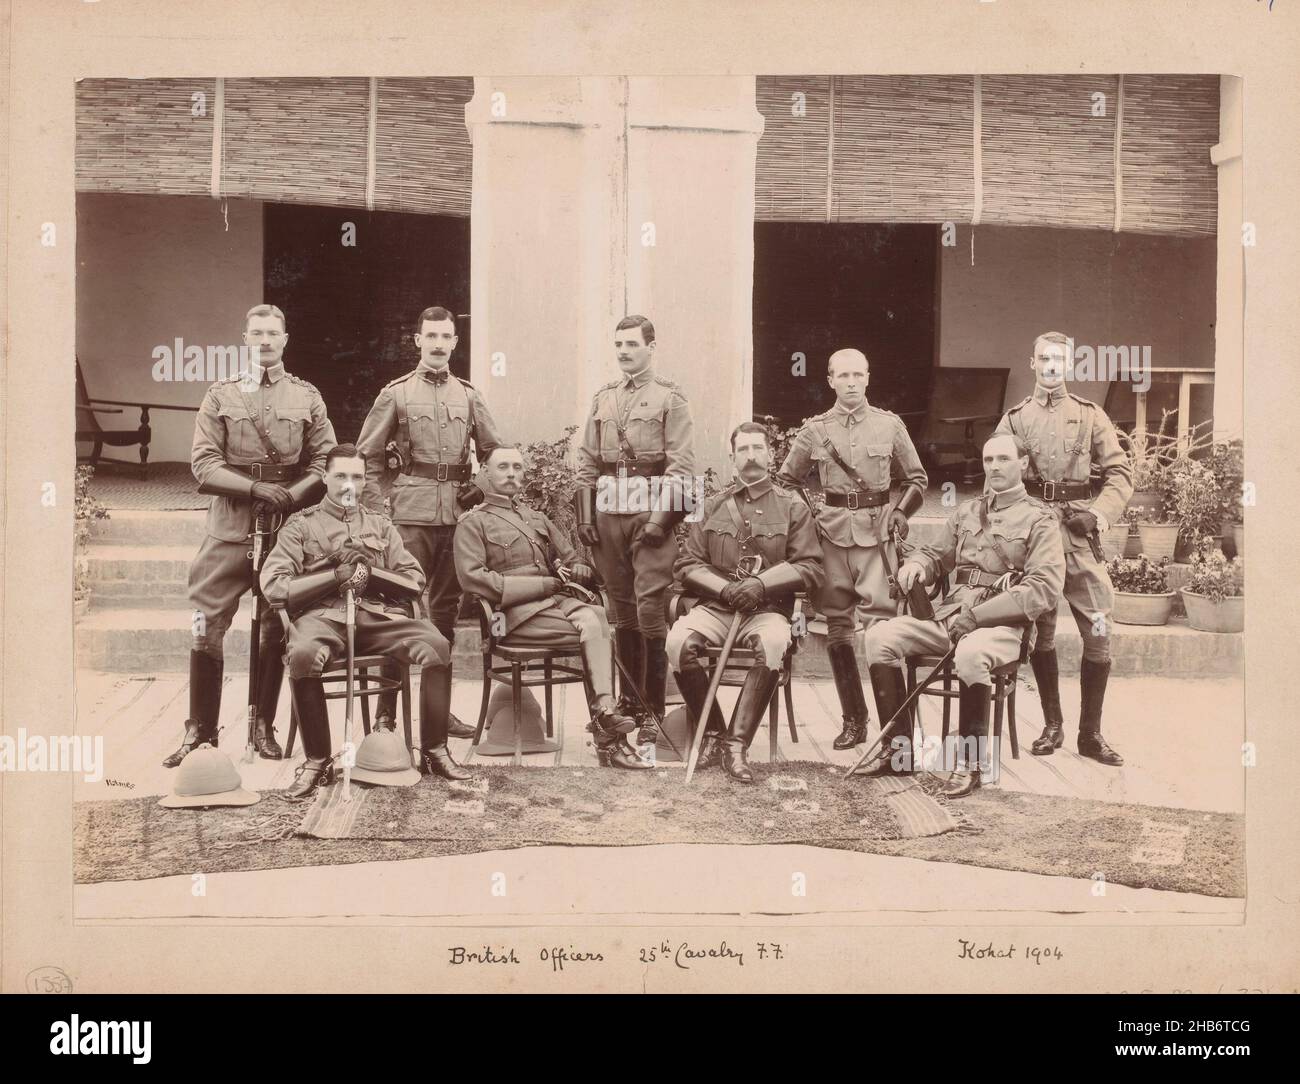 British officers, Kohat, Pakistan, Nine officers of the British army in uniform of the 25. Cavalry 7.7. sitting and standing in front of a house, Kohat, Pakistan Stock Photo